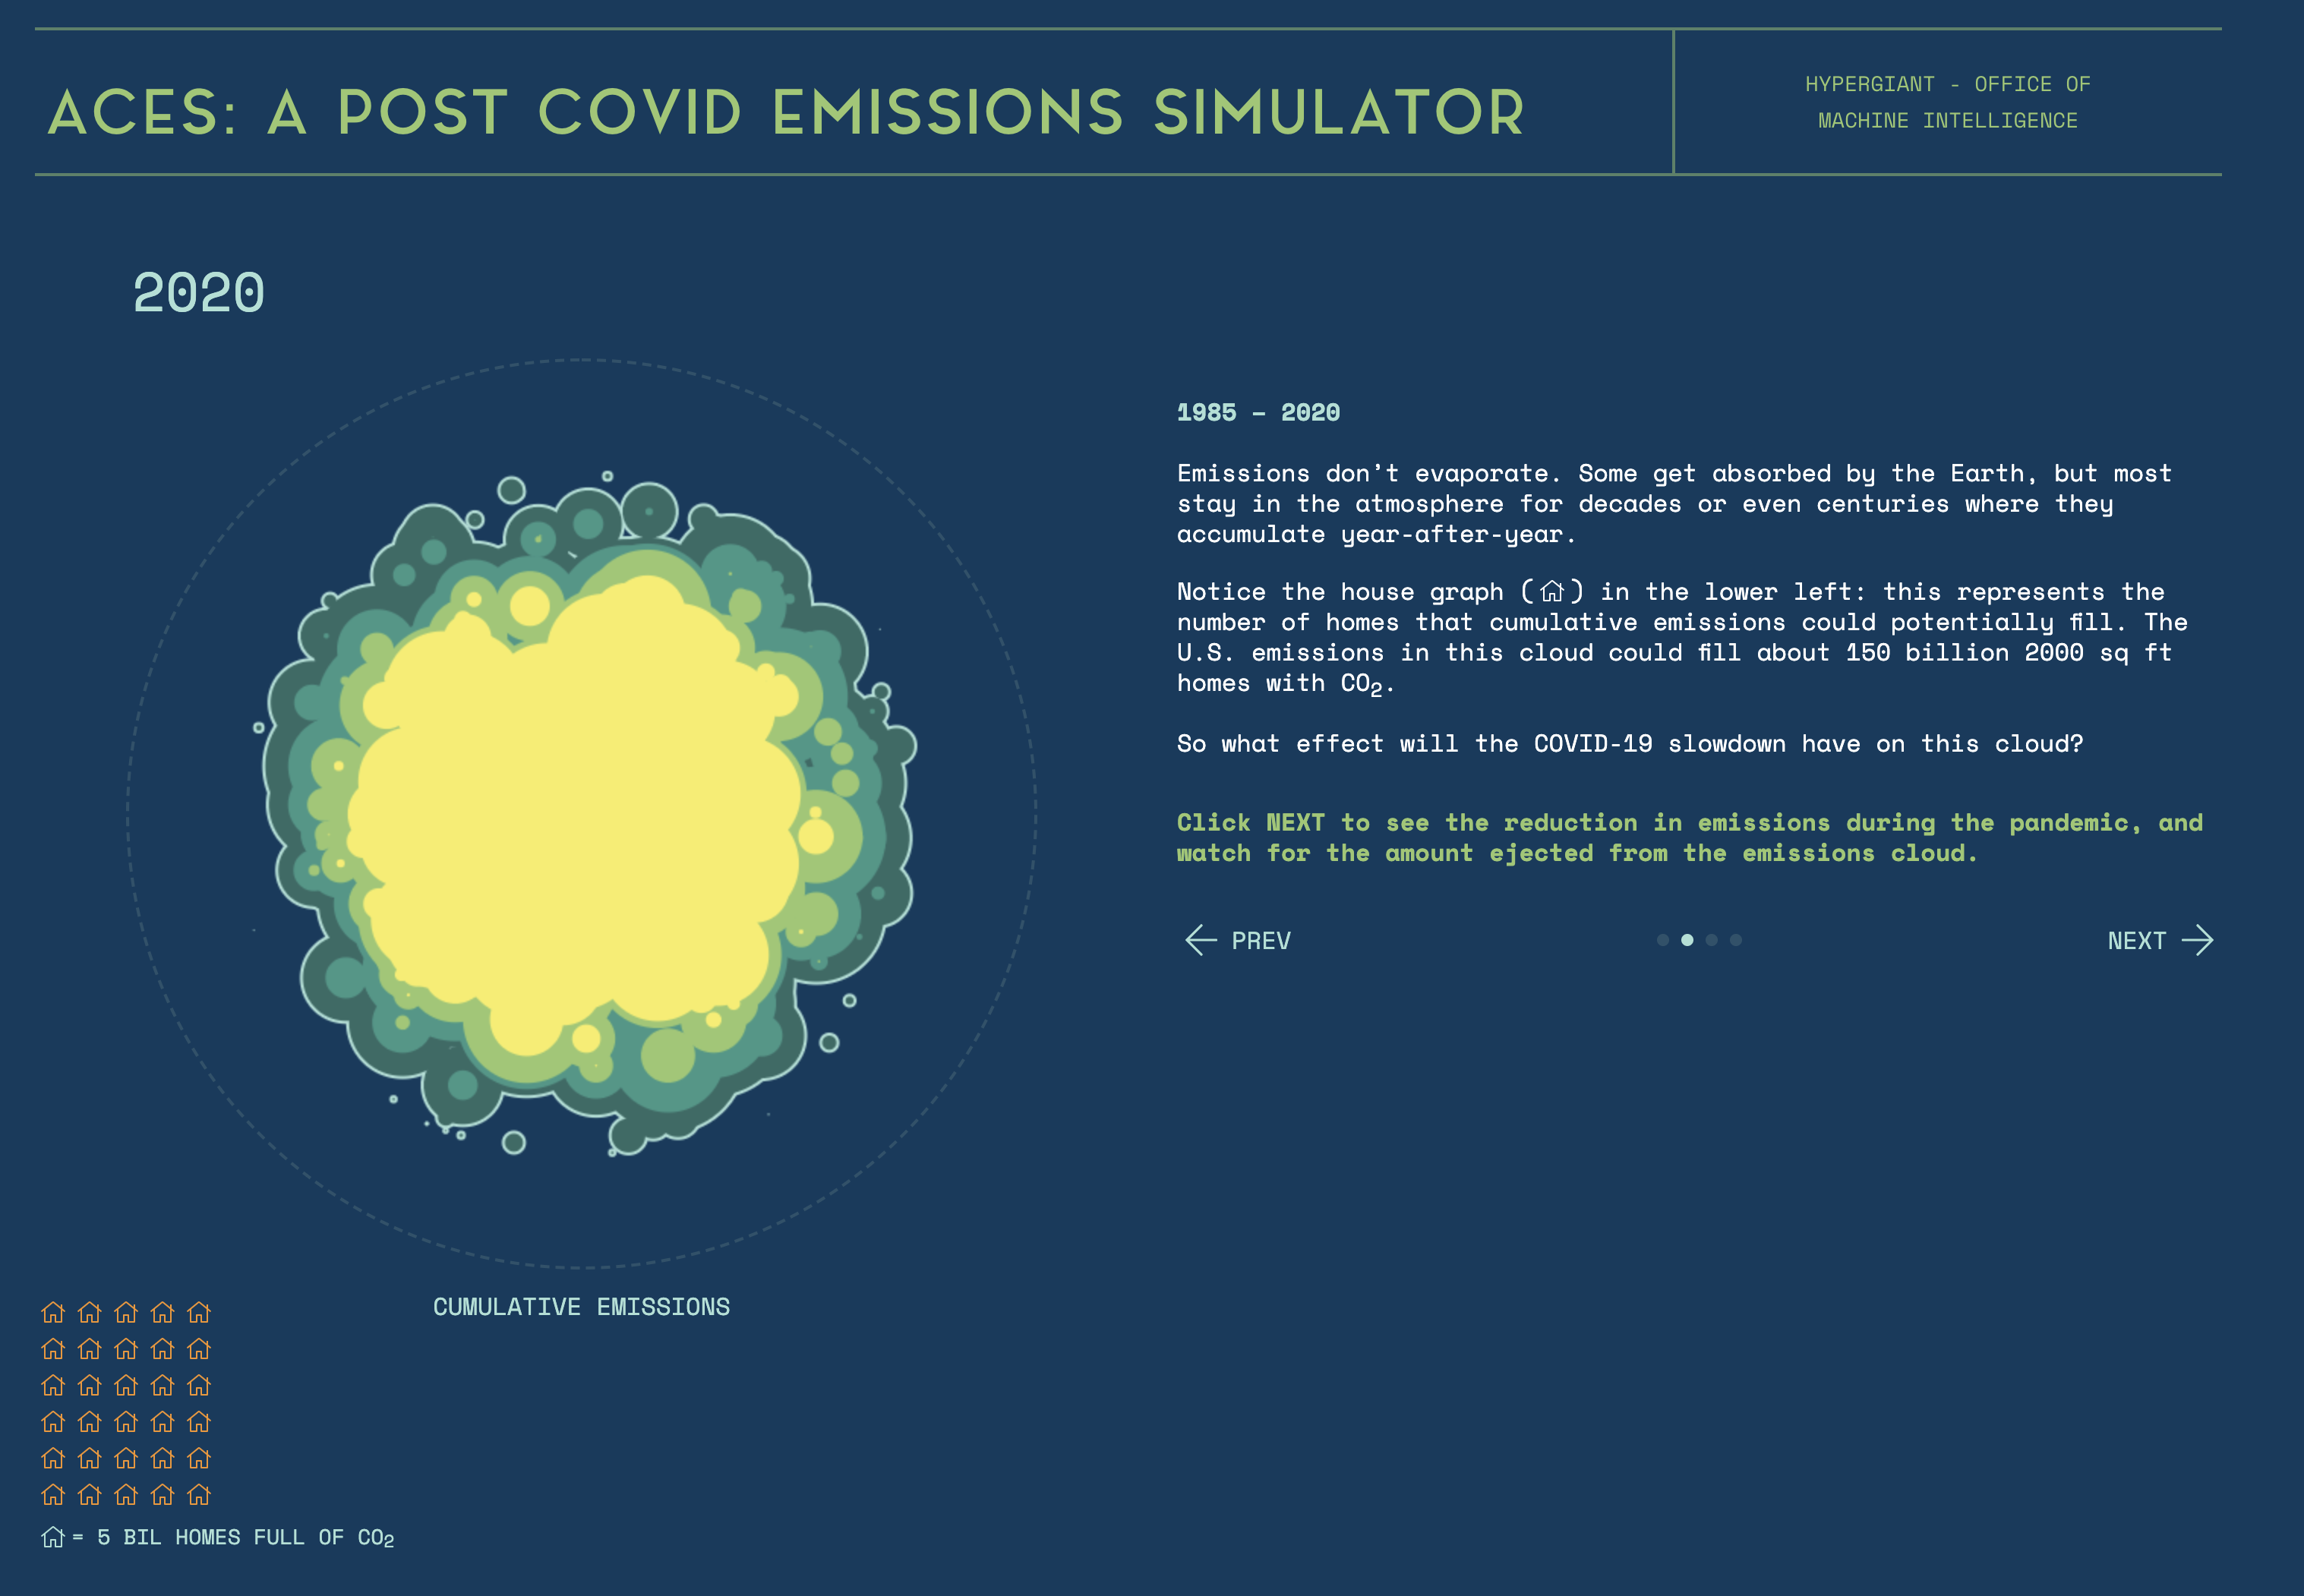 Austin Company Uses AI to Show COVID-19's Real Climate Change Impact - Built In Austin